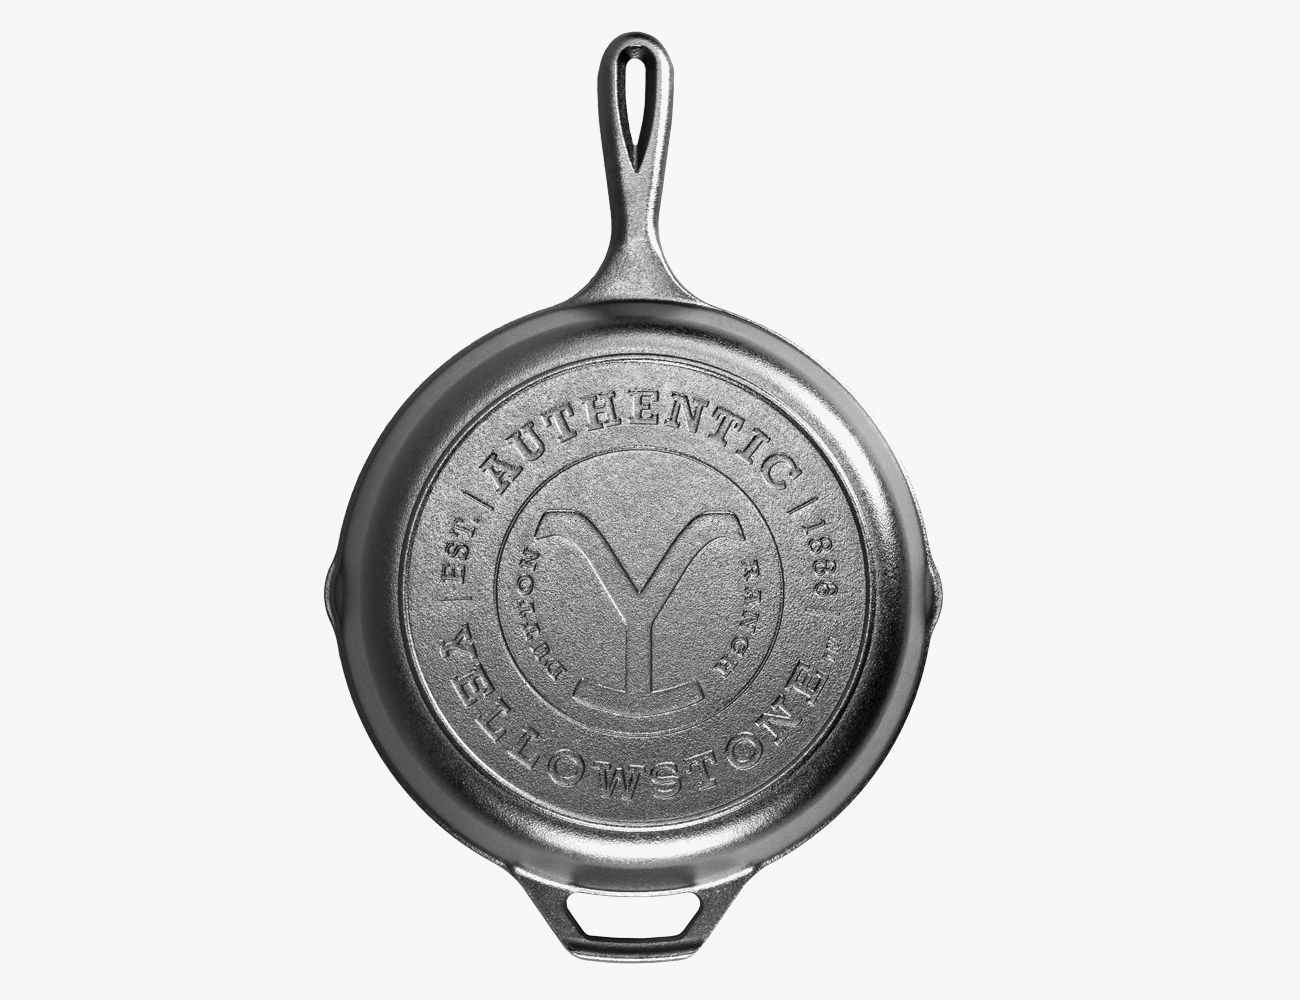  Lodge 9 Inch Cast Iron Pre-Seasoned Skillet – Signature  Teardrop Handle - Use in the Oven, on the Stove, on the Grill, or Over a  Campfire, Black: Cast Iron Skillet: Home